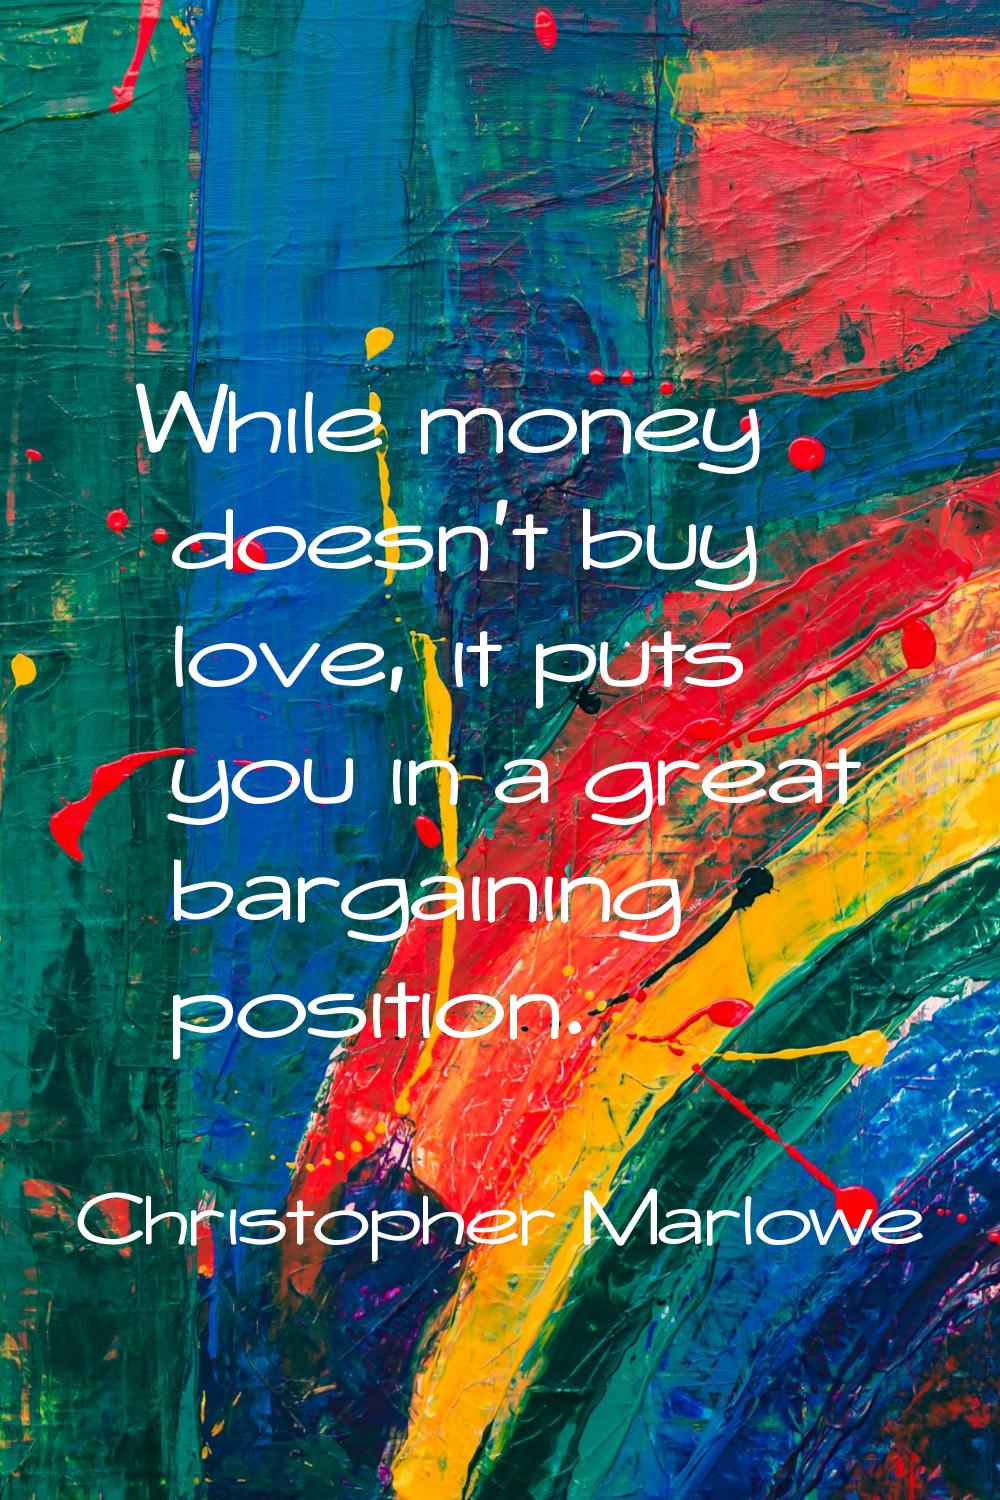 While money doesn't buy love, it puts you in a great bargaining position.